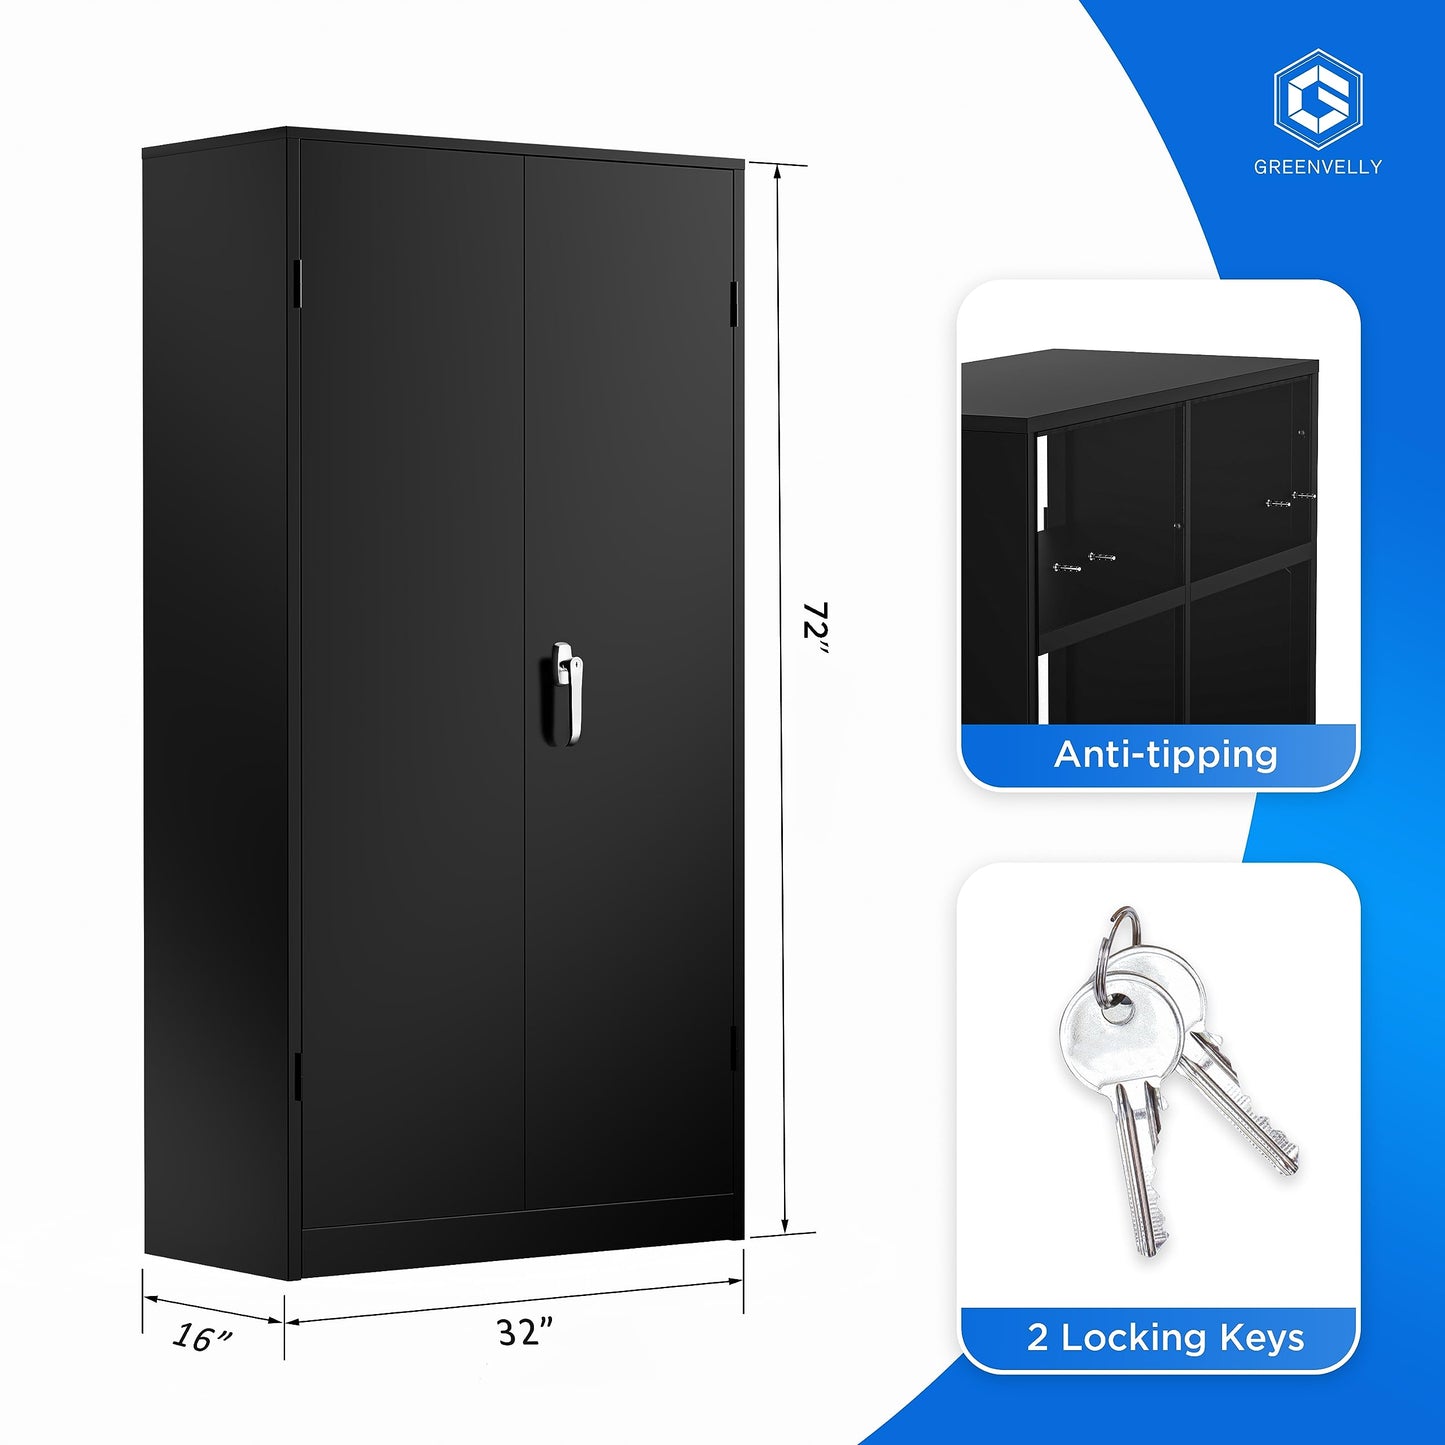 Greenvelly Metal Storage Cabinet, 72" Black Locking Storage Cabinets with Doors and 4 Shelves, Tall Tool Storage Cabinet for Garage, Steel Lockable